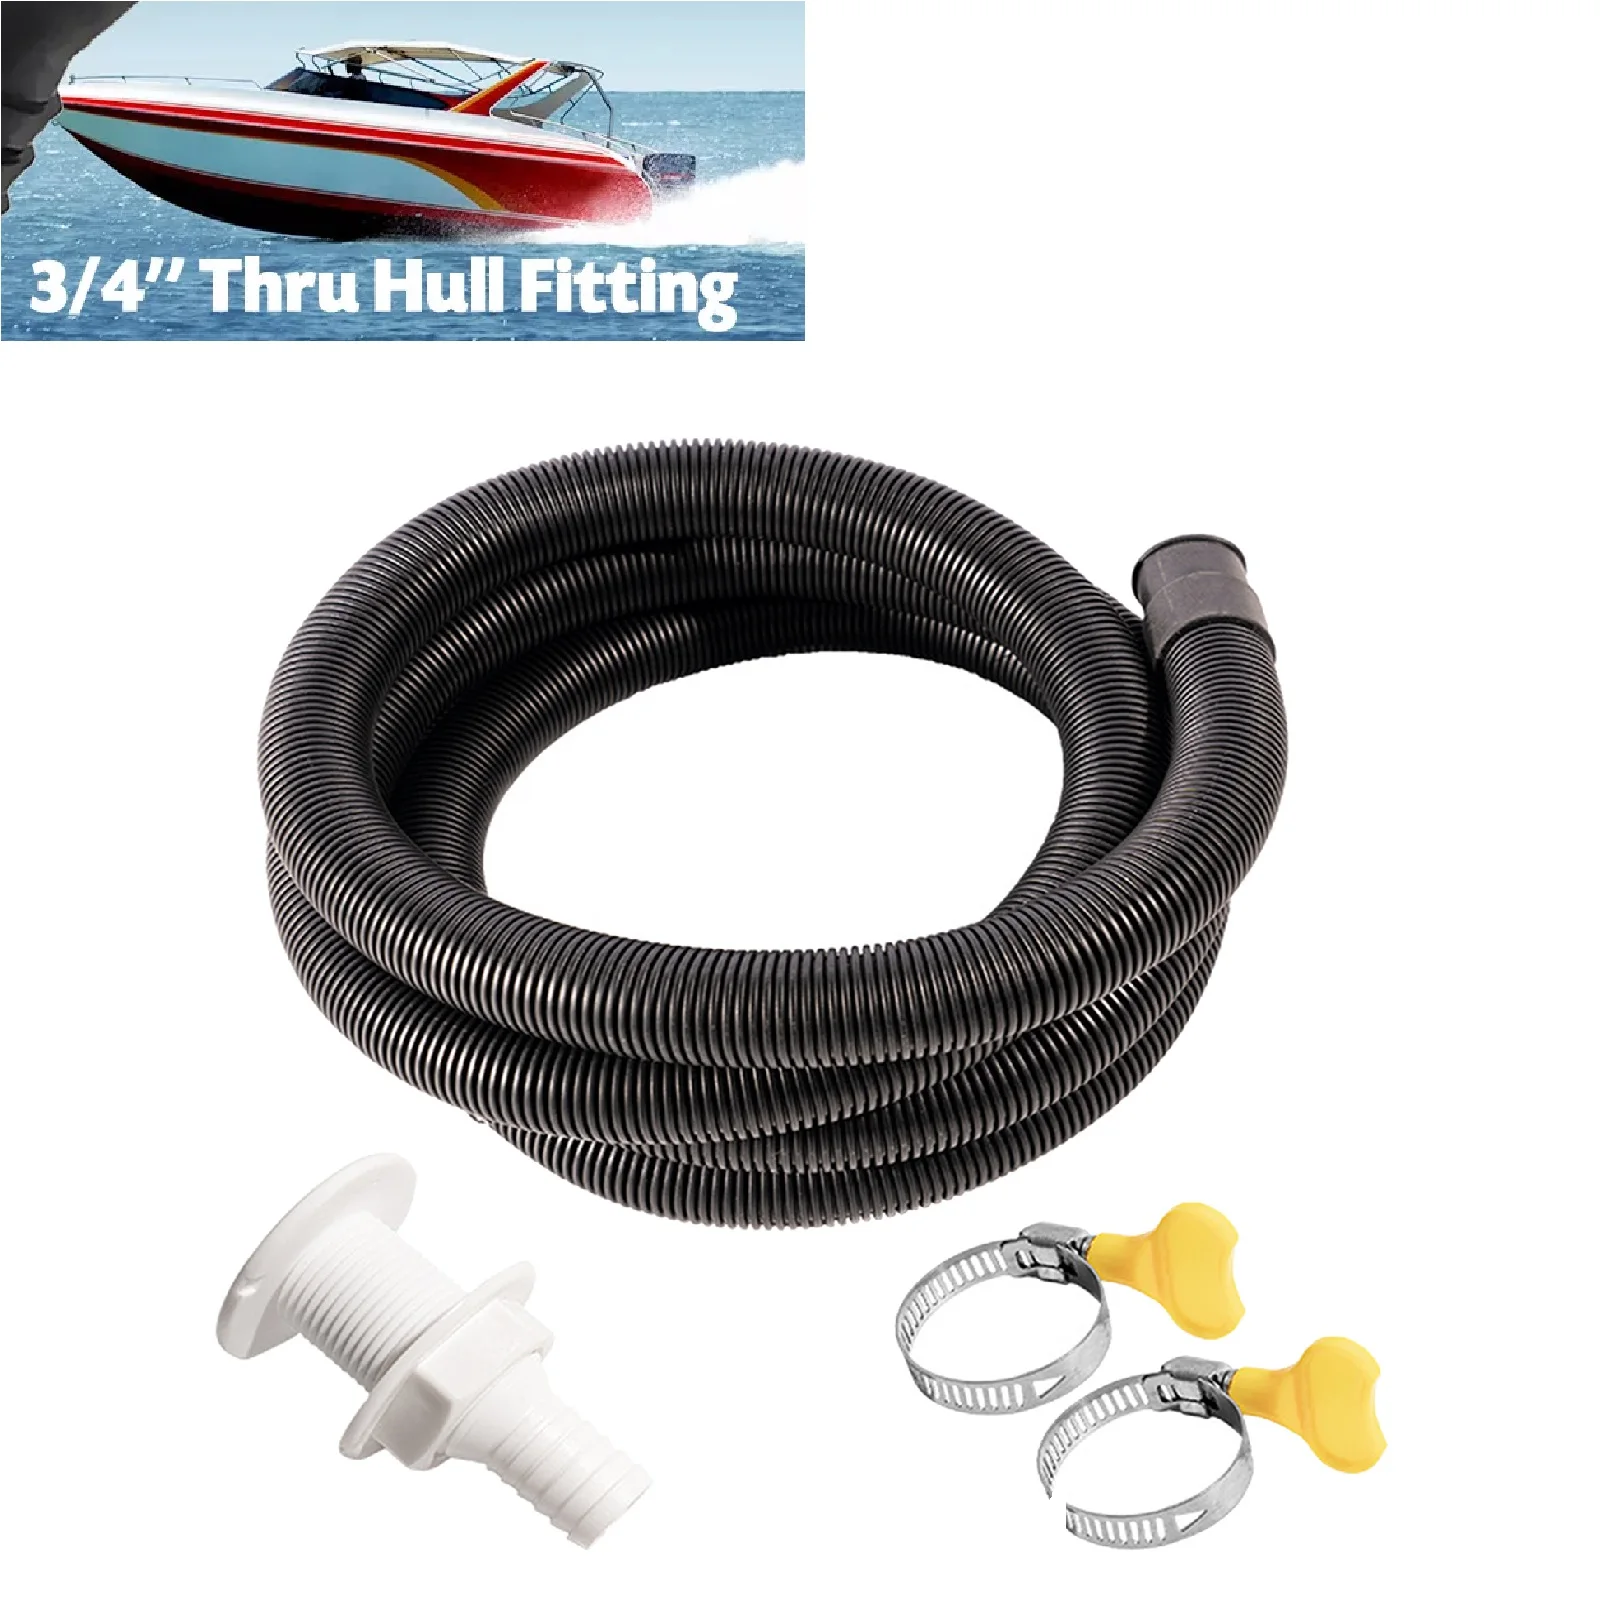 Flexible Bilge Pump Hose Installation Kit 3/4-Inch Diameter 6.6 FT for Boats with 2 Clamps and Thru-Hull Fitting marine bilge pump plumbing kit flexible pvc drainage pipe hose heavy duty discharge hose with clamps and fitting easy